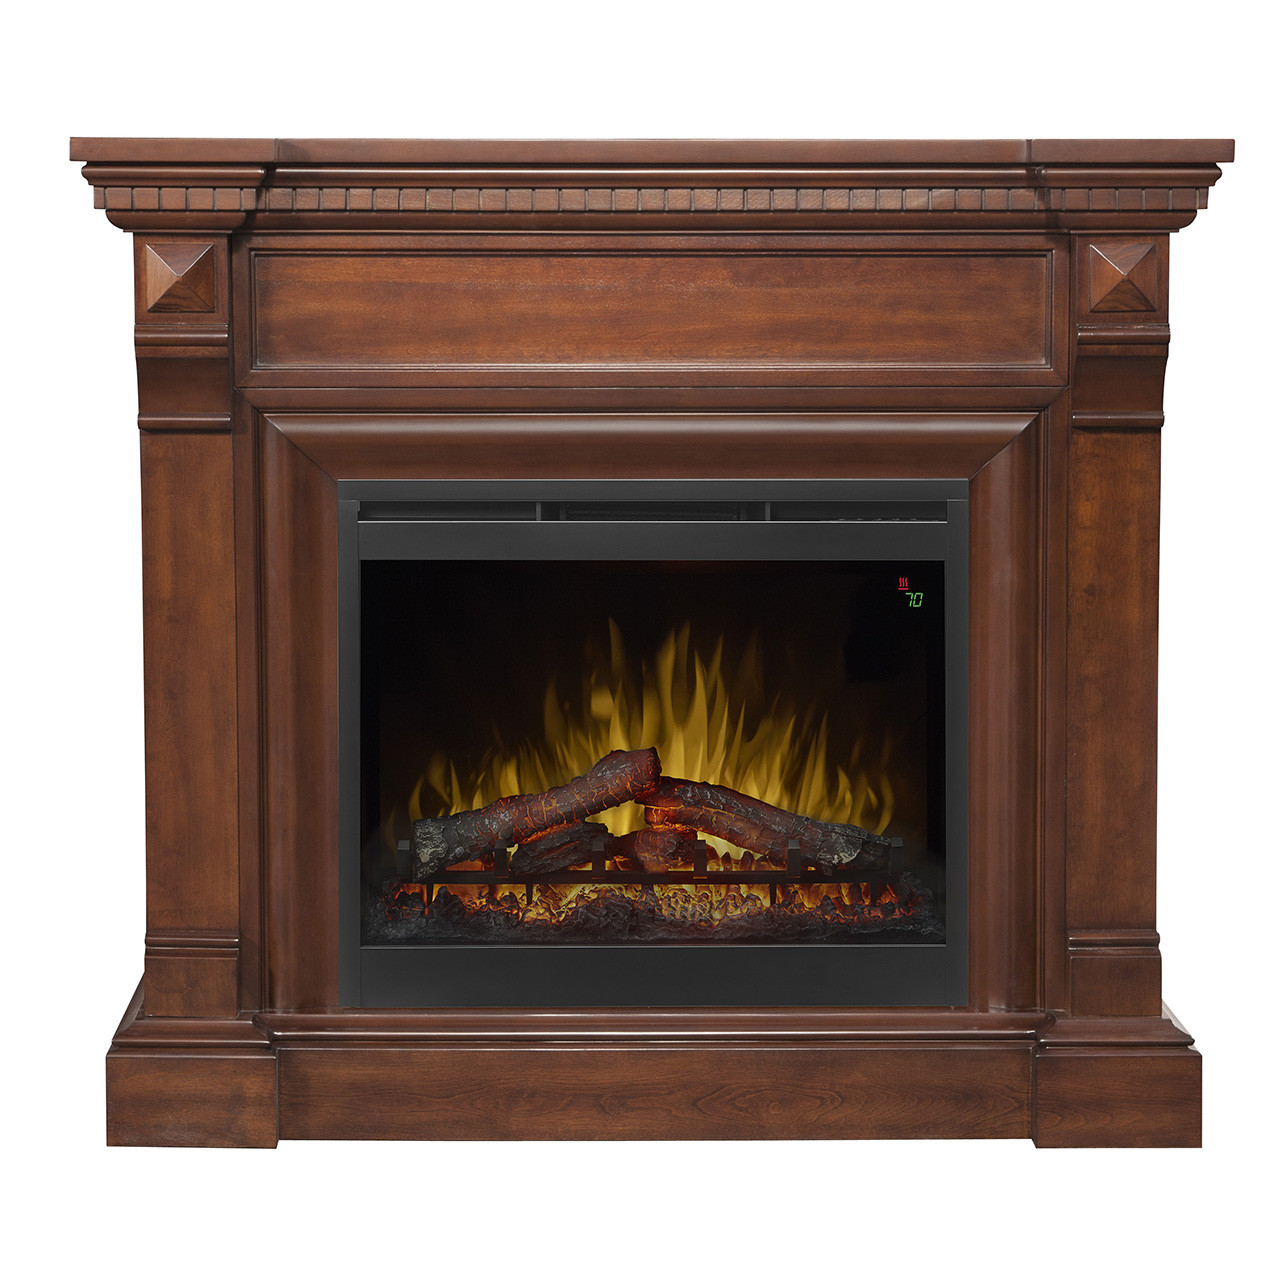 48 Inch Electric Fireplace
 48 5" Dimplex William Electric Fireplace Mantel in